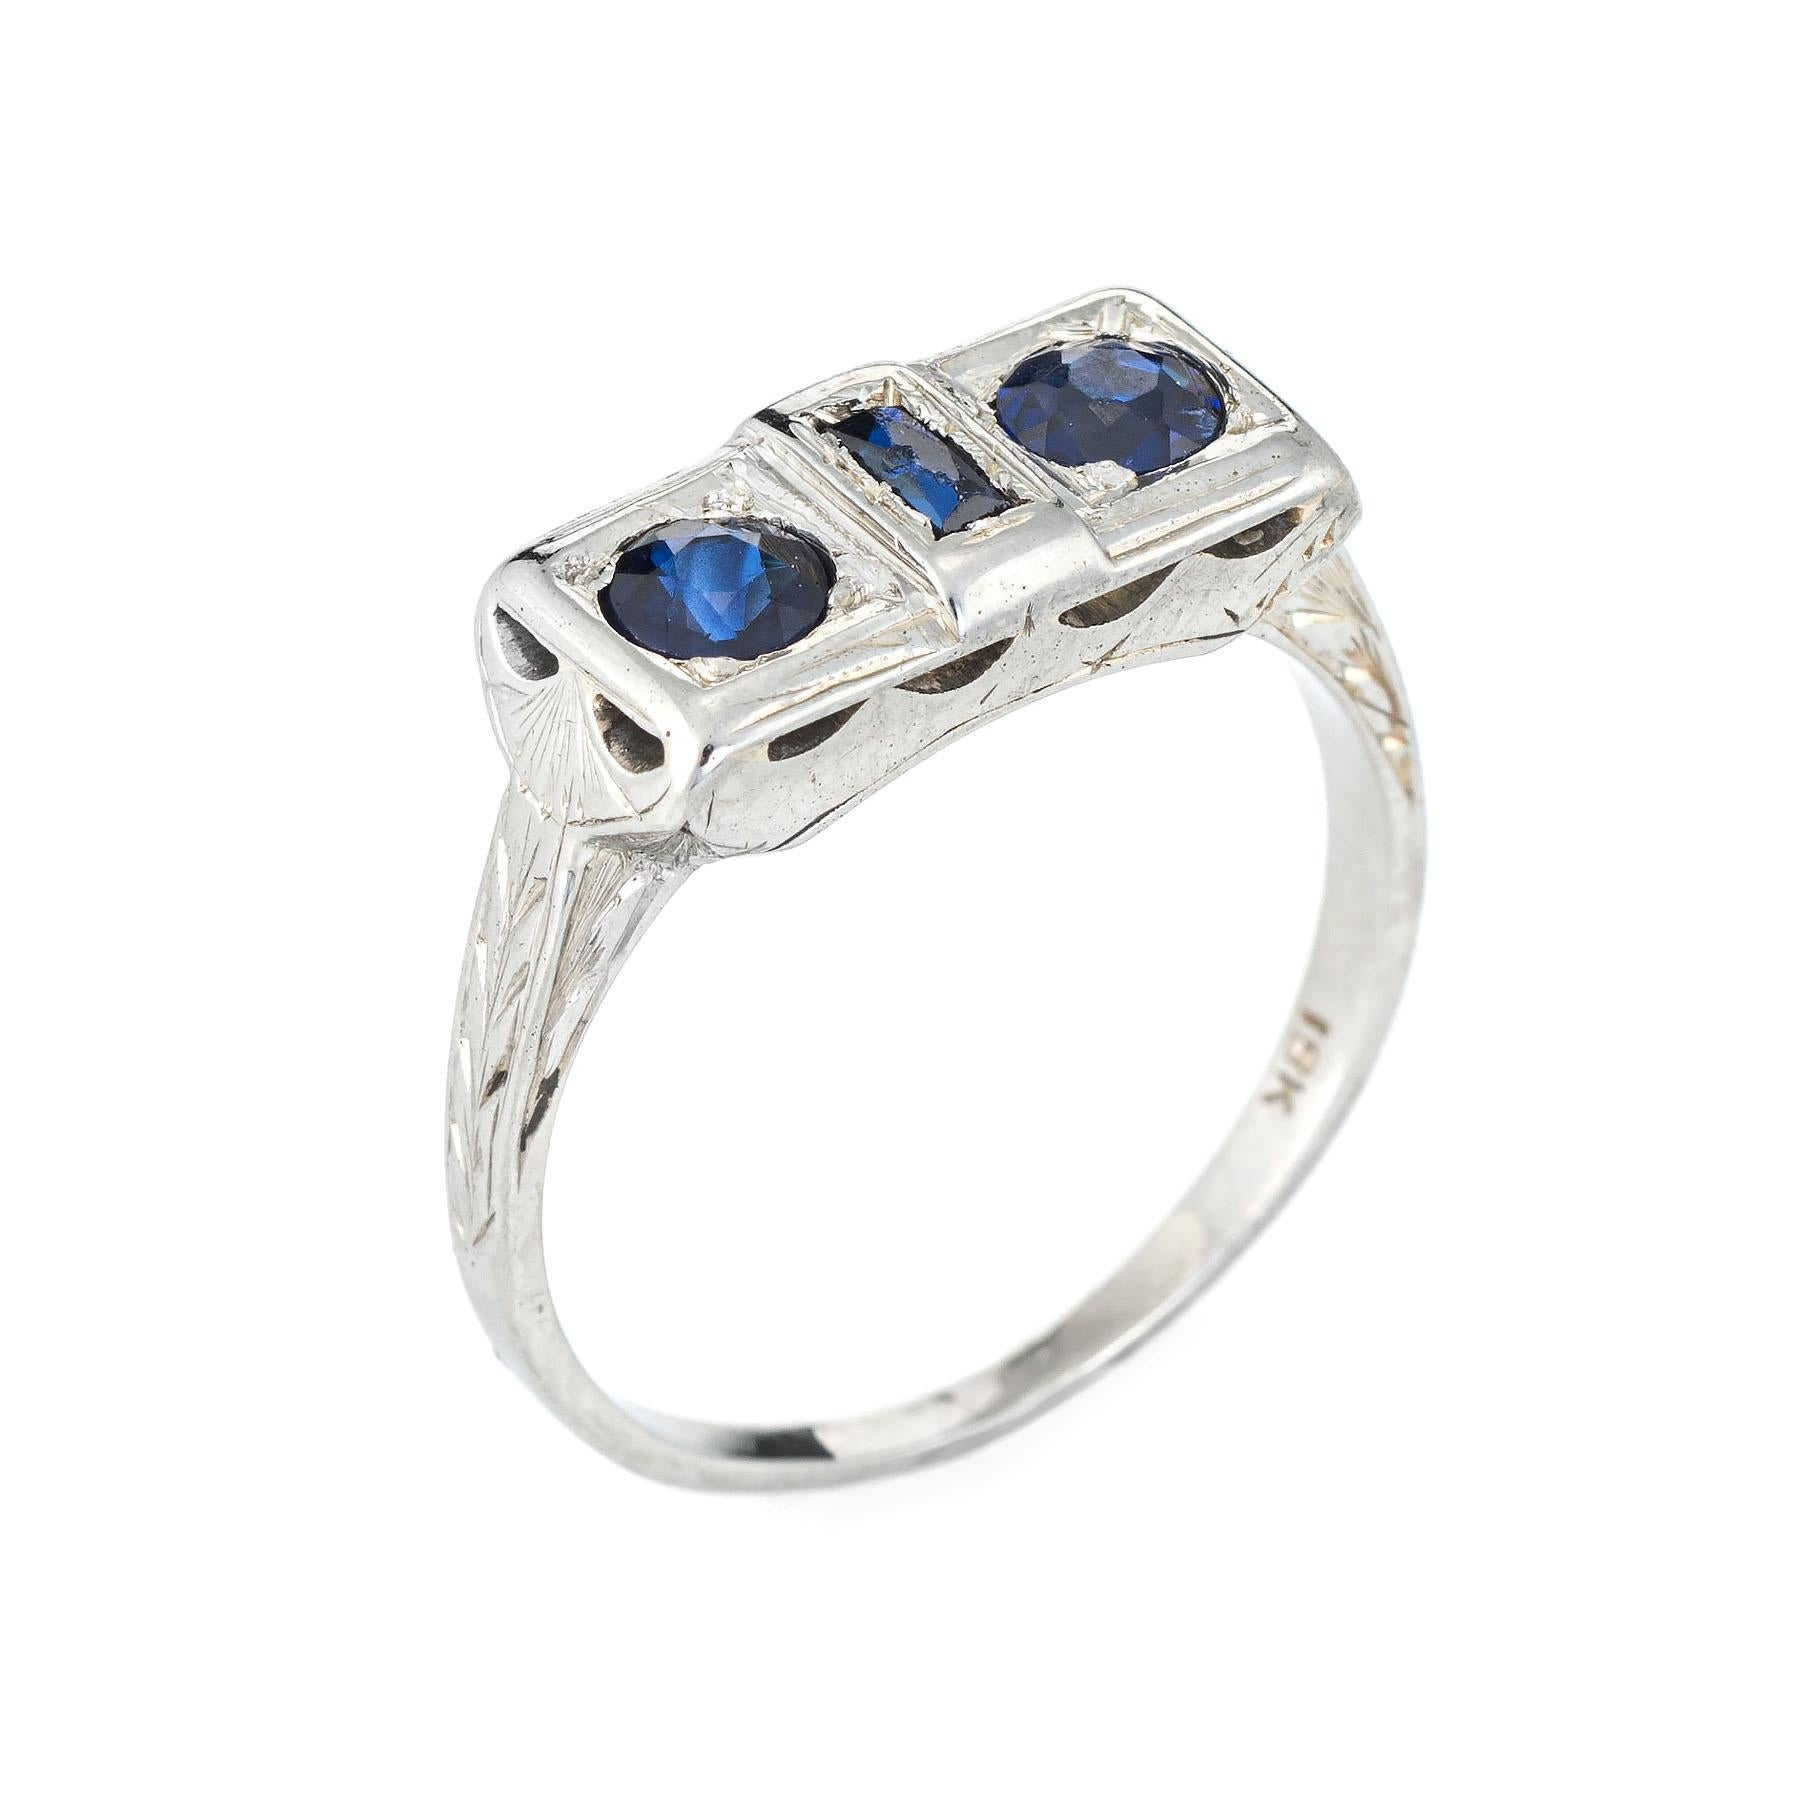 Finely detailed vintage Art Deco era ring (circa 1920s to 1930s) crafted in 18 karat white gold. 

Two faceted round cut sapphire are estimated at 0.15 carats each, accented with one estimated 0.05 carat French cut sapphire. The total sapphire